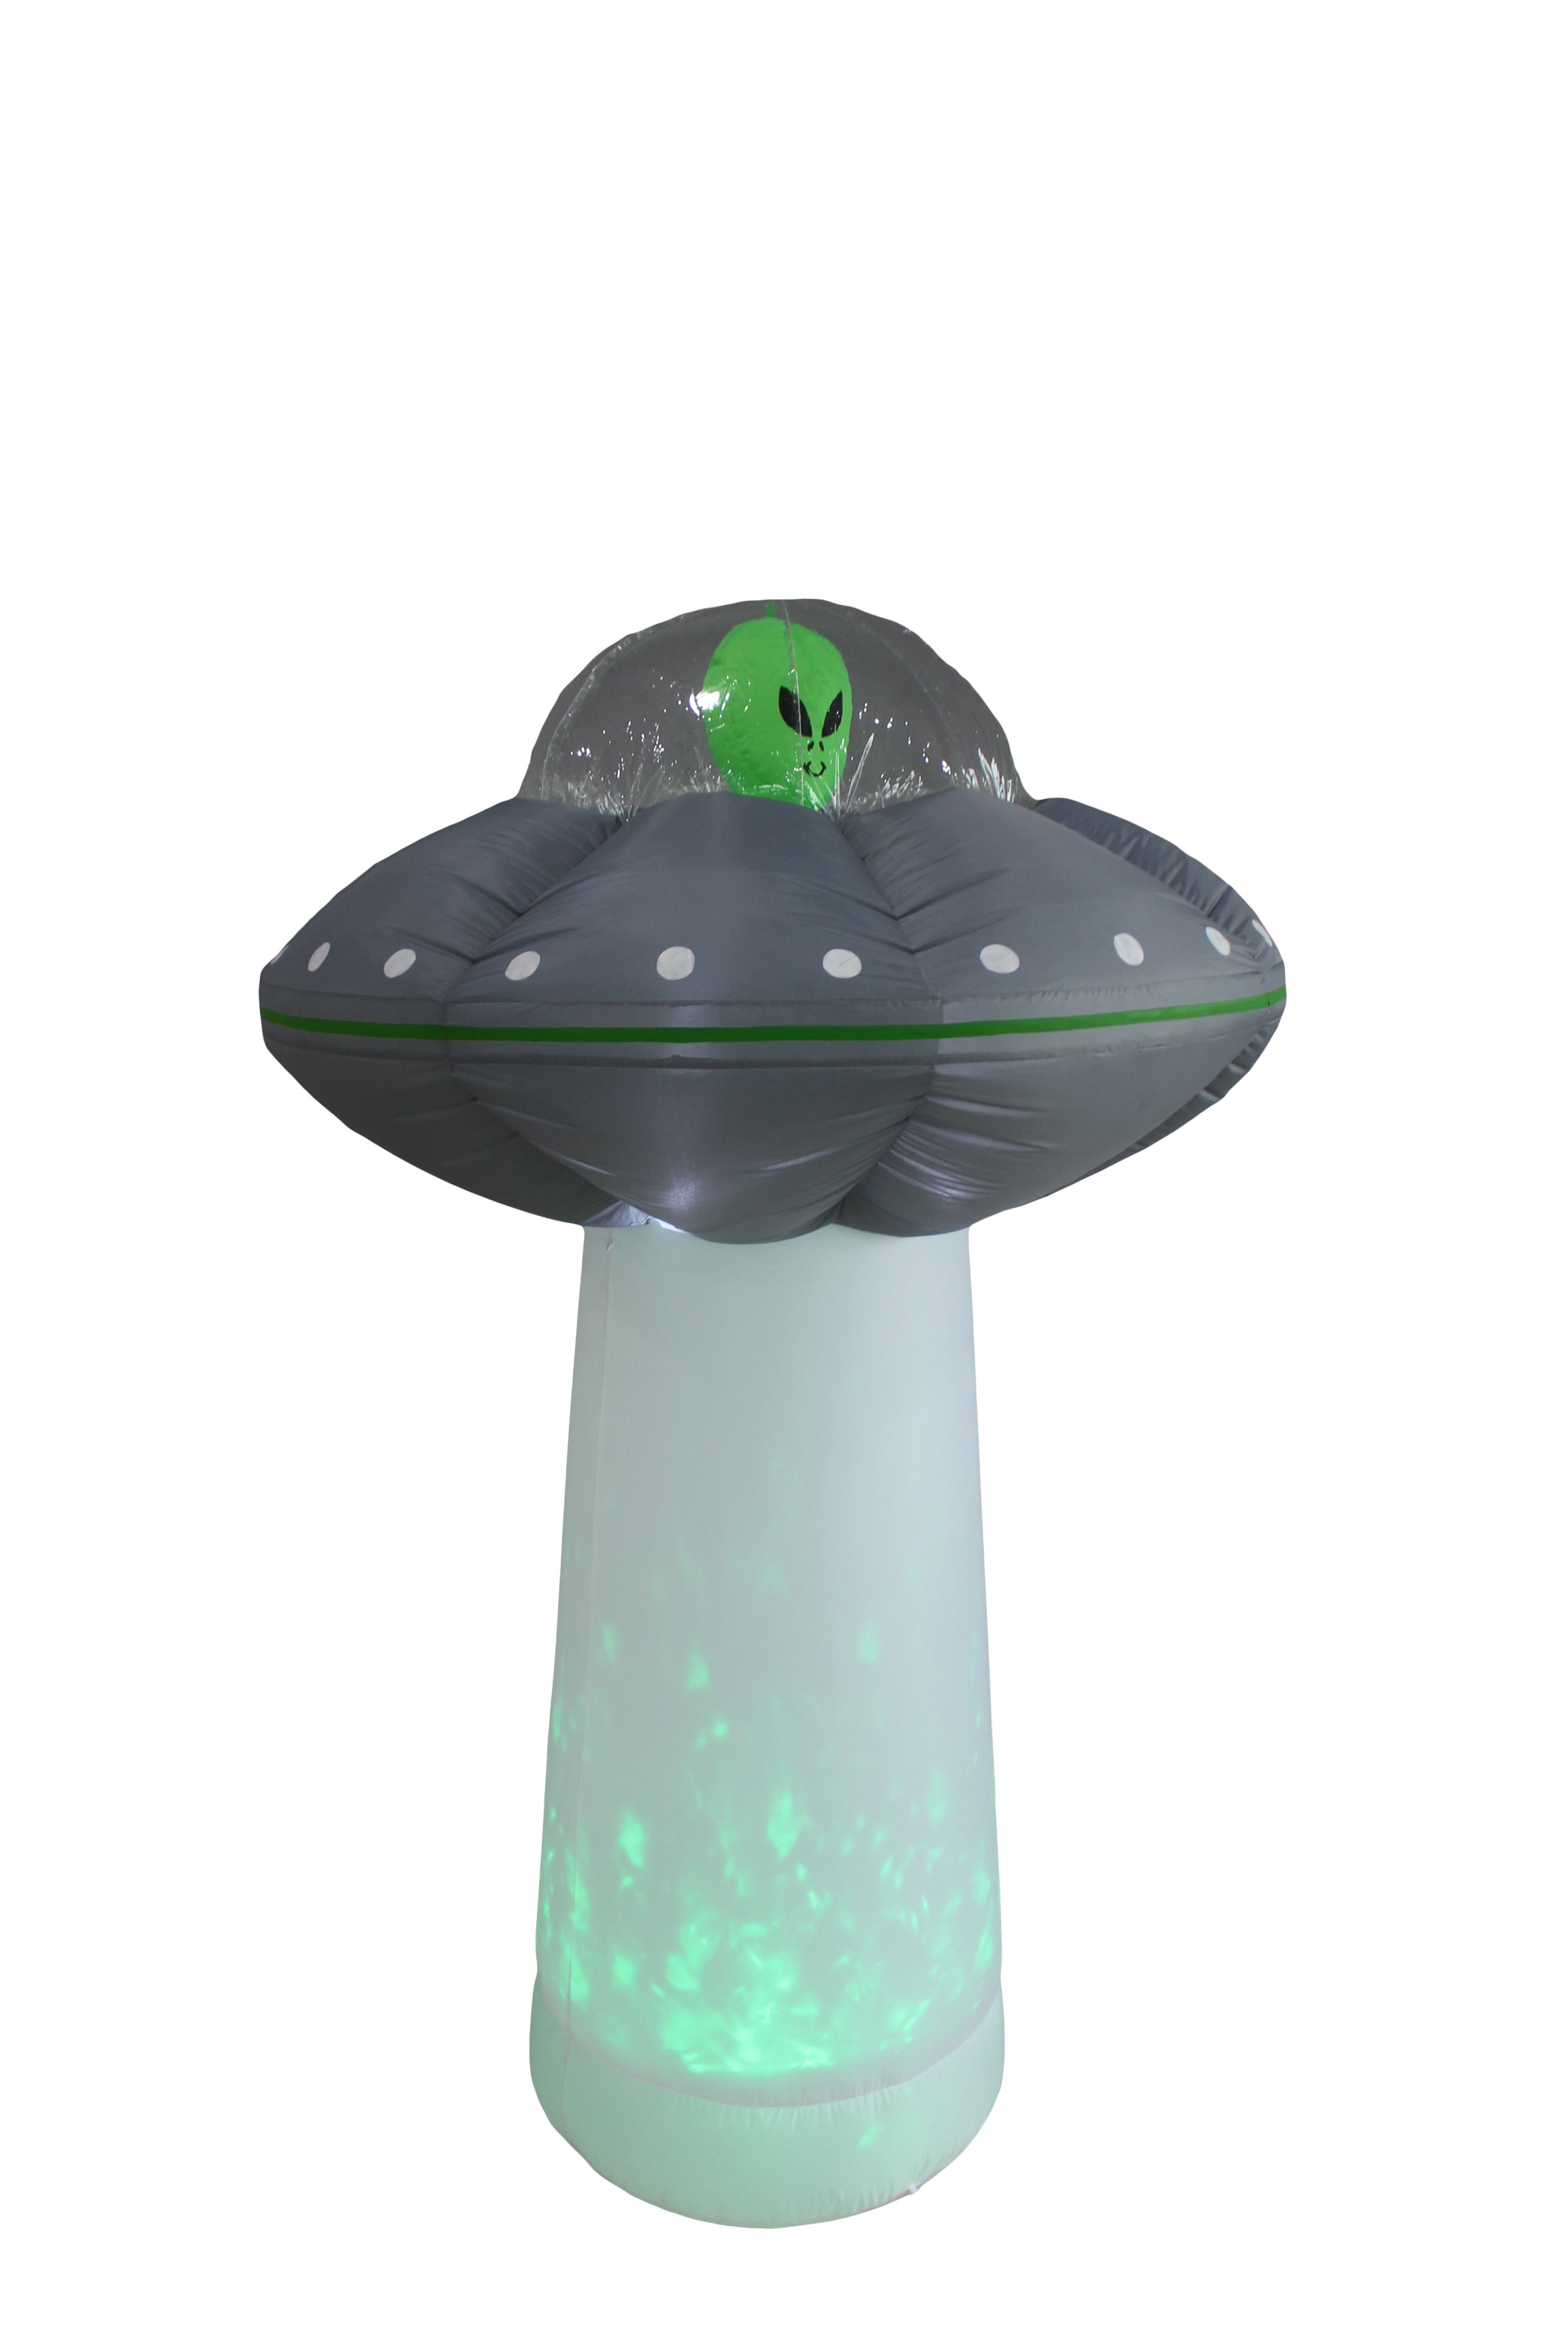 A Holiday Company 7ft Inflatable Alien UFO w/ Inferno Tractor Beam, 7 ft Tall, Multi